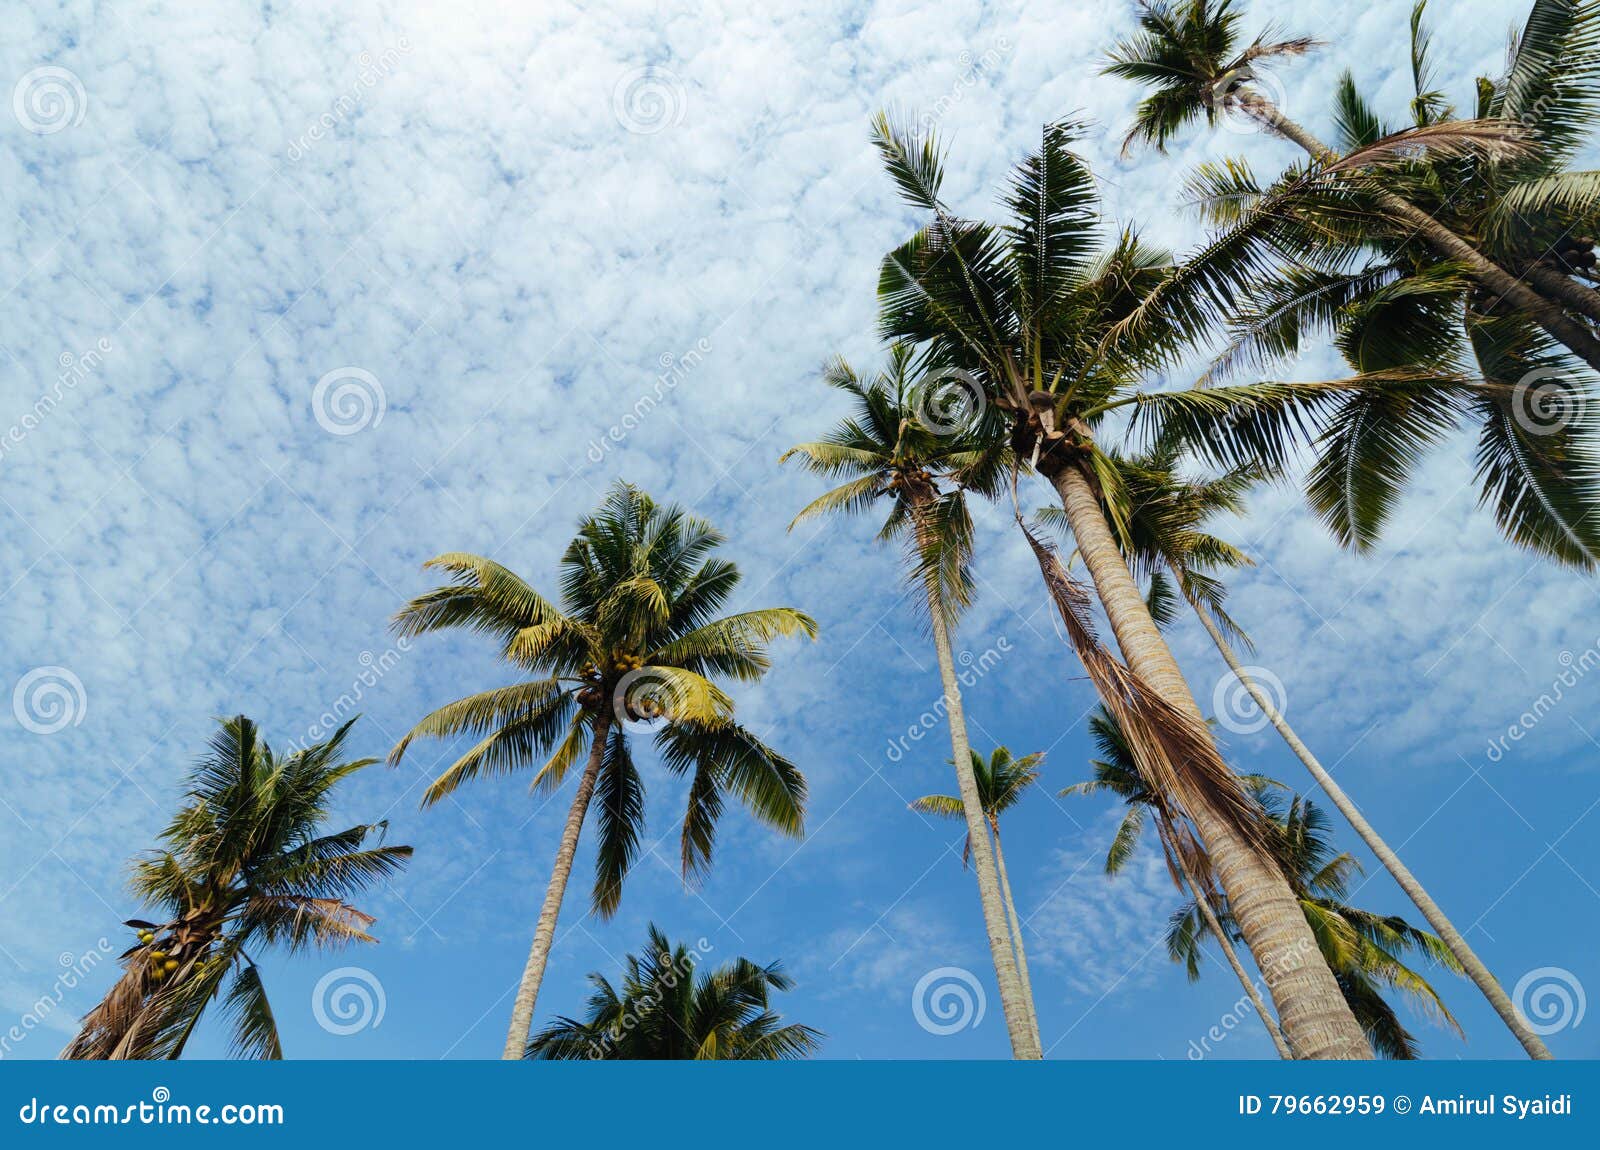 Beautiful Nature, Coconut Tree Over Cloudy Blue Sky Background Stock ...